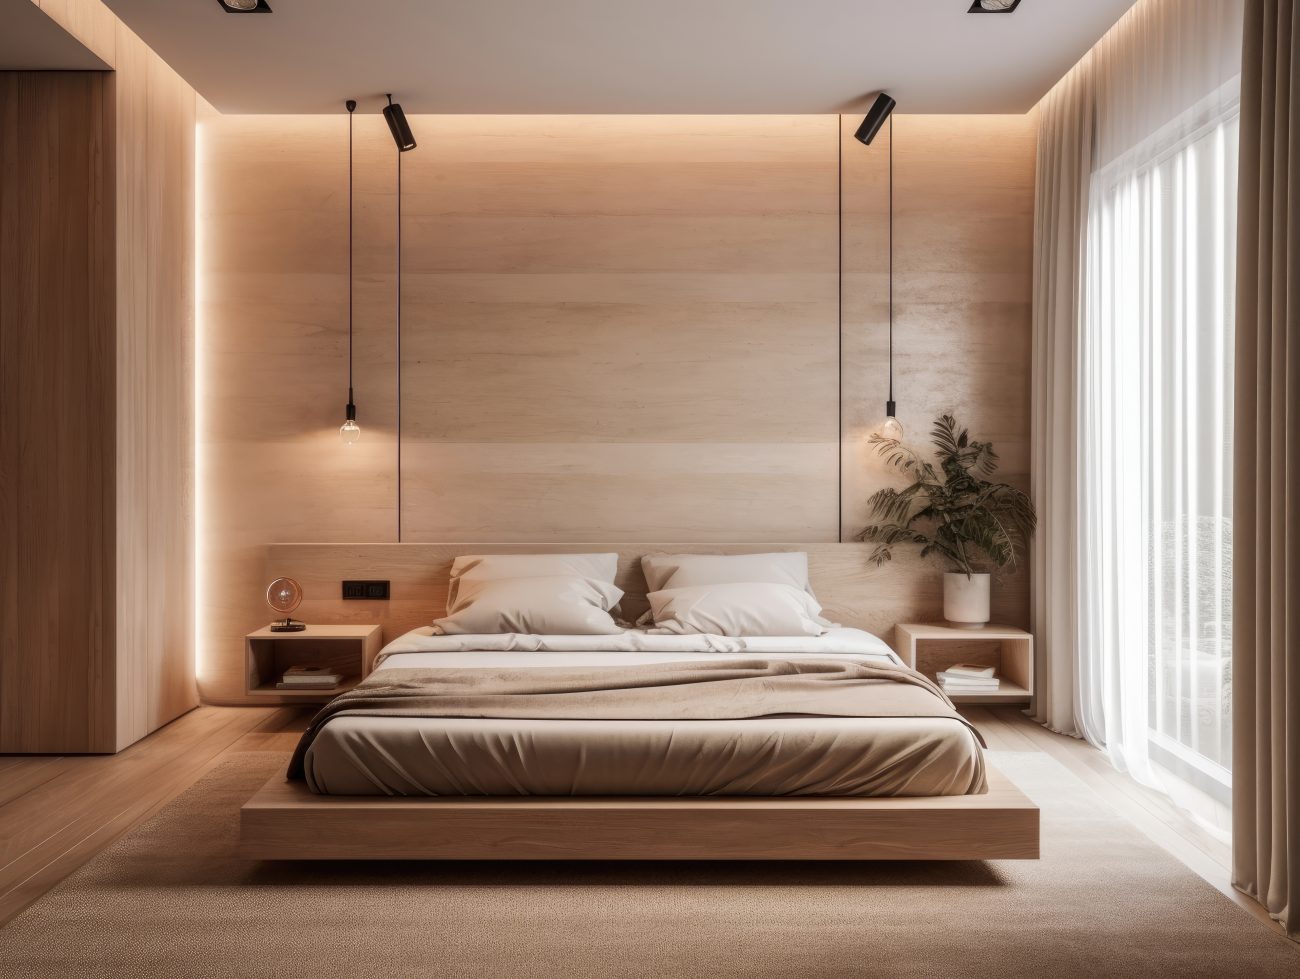 Minimalist beige bedroom with king-size bed on a platform, suspended halogen spotlights and indirect lighting on the marble effect wall